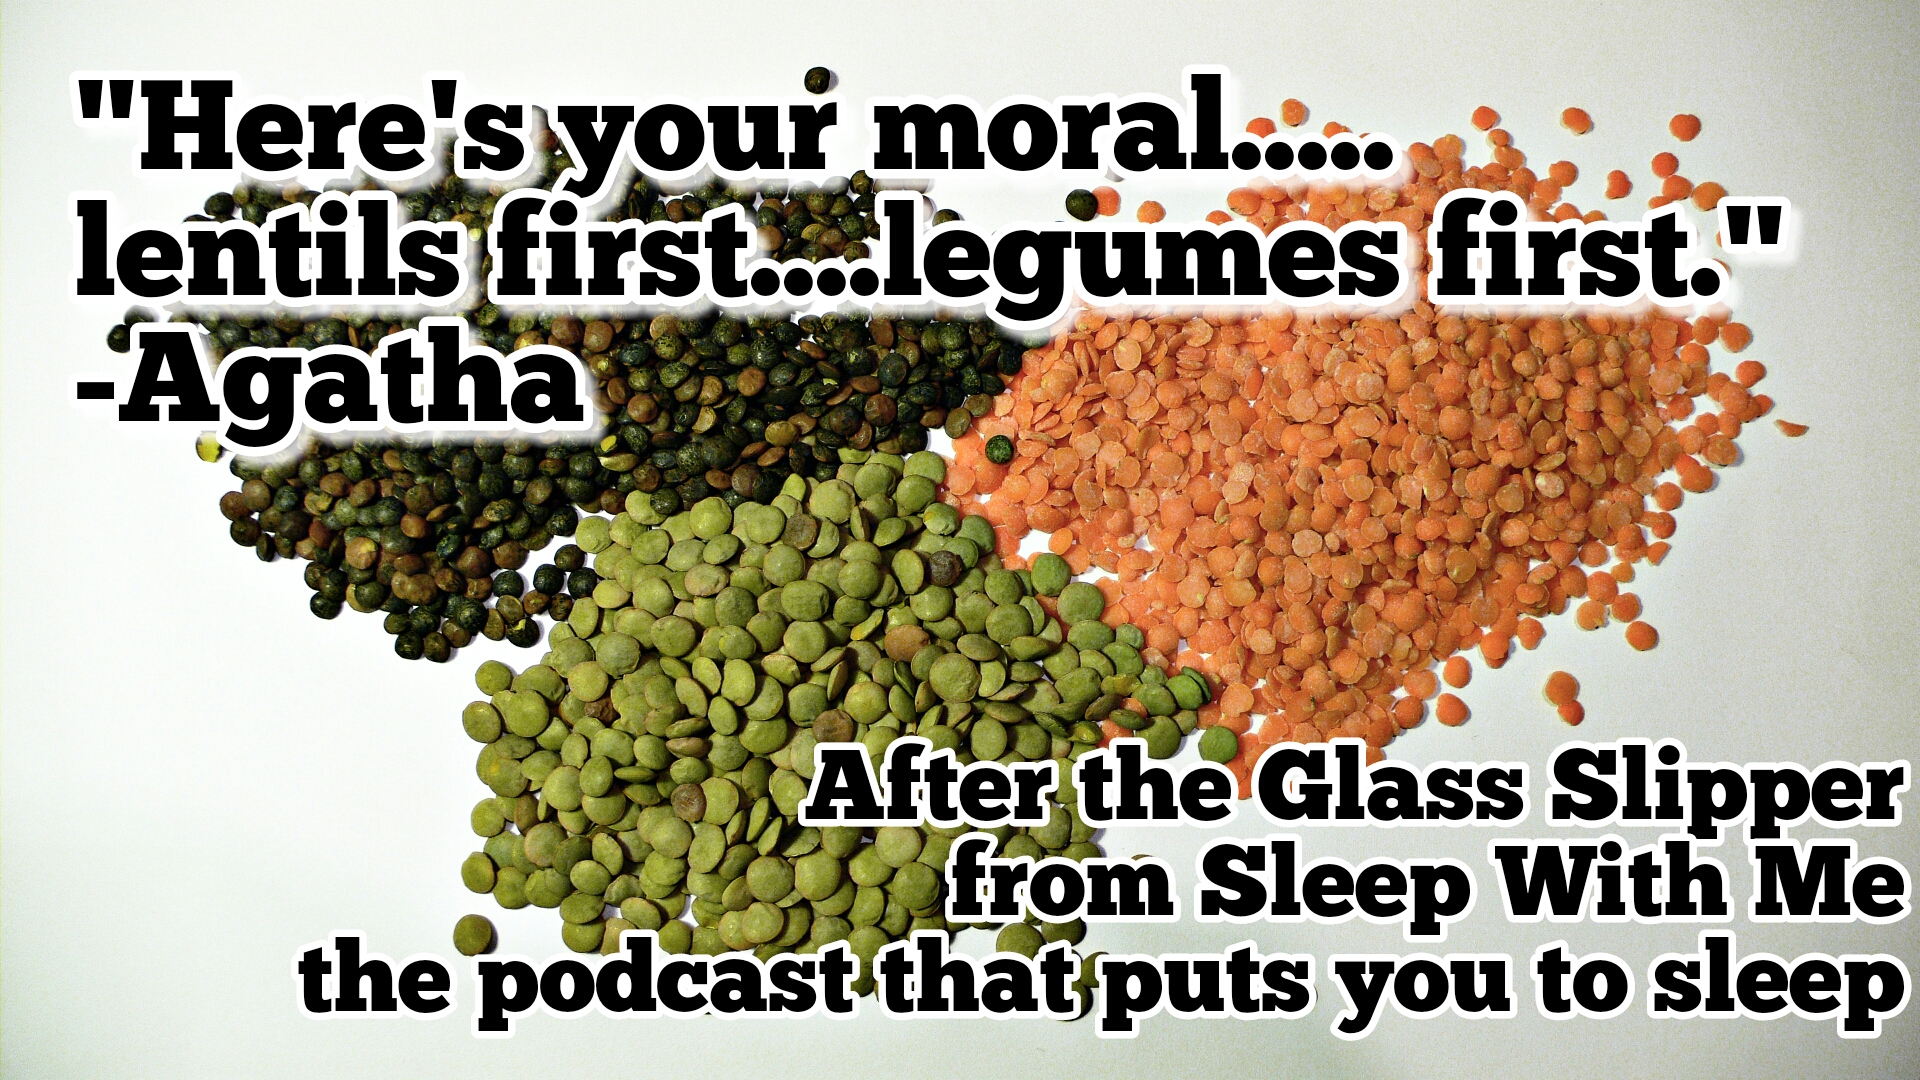 Lentils are the moral of the story